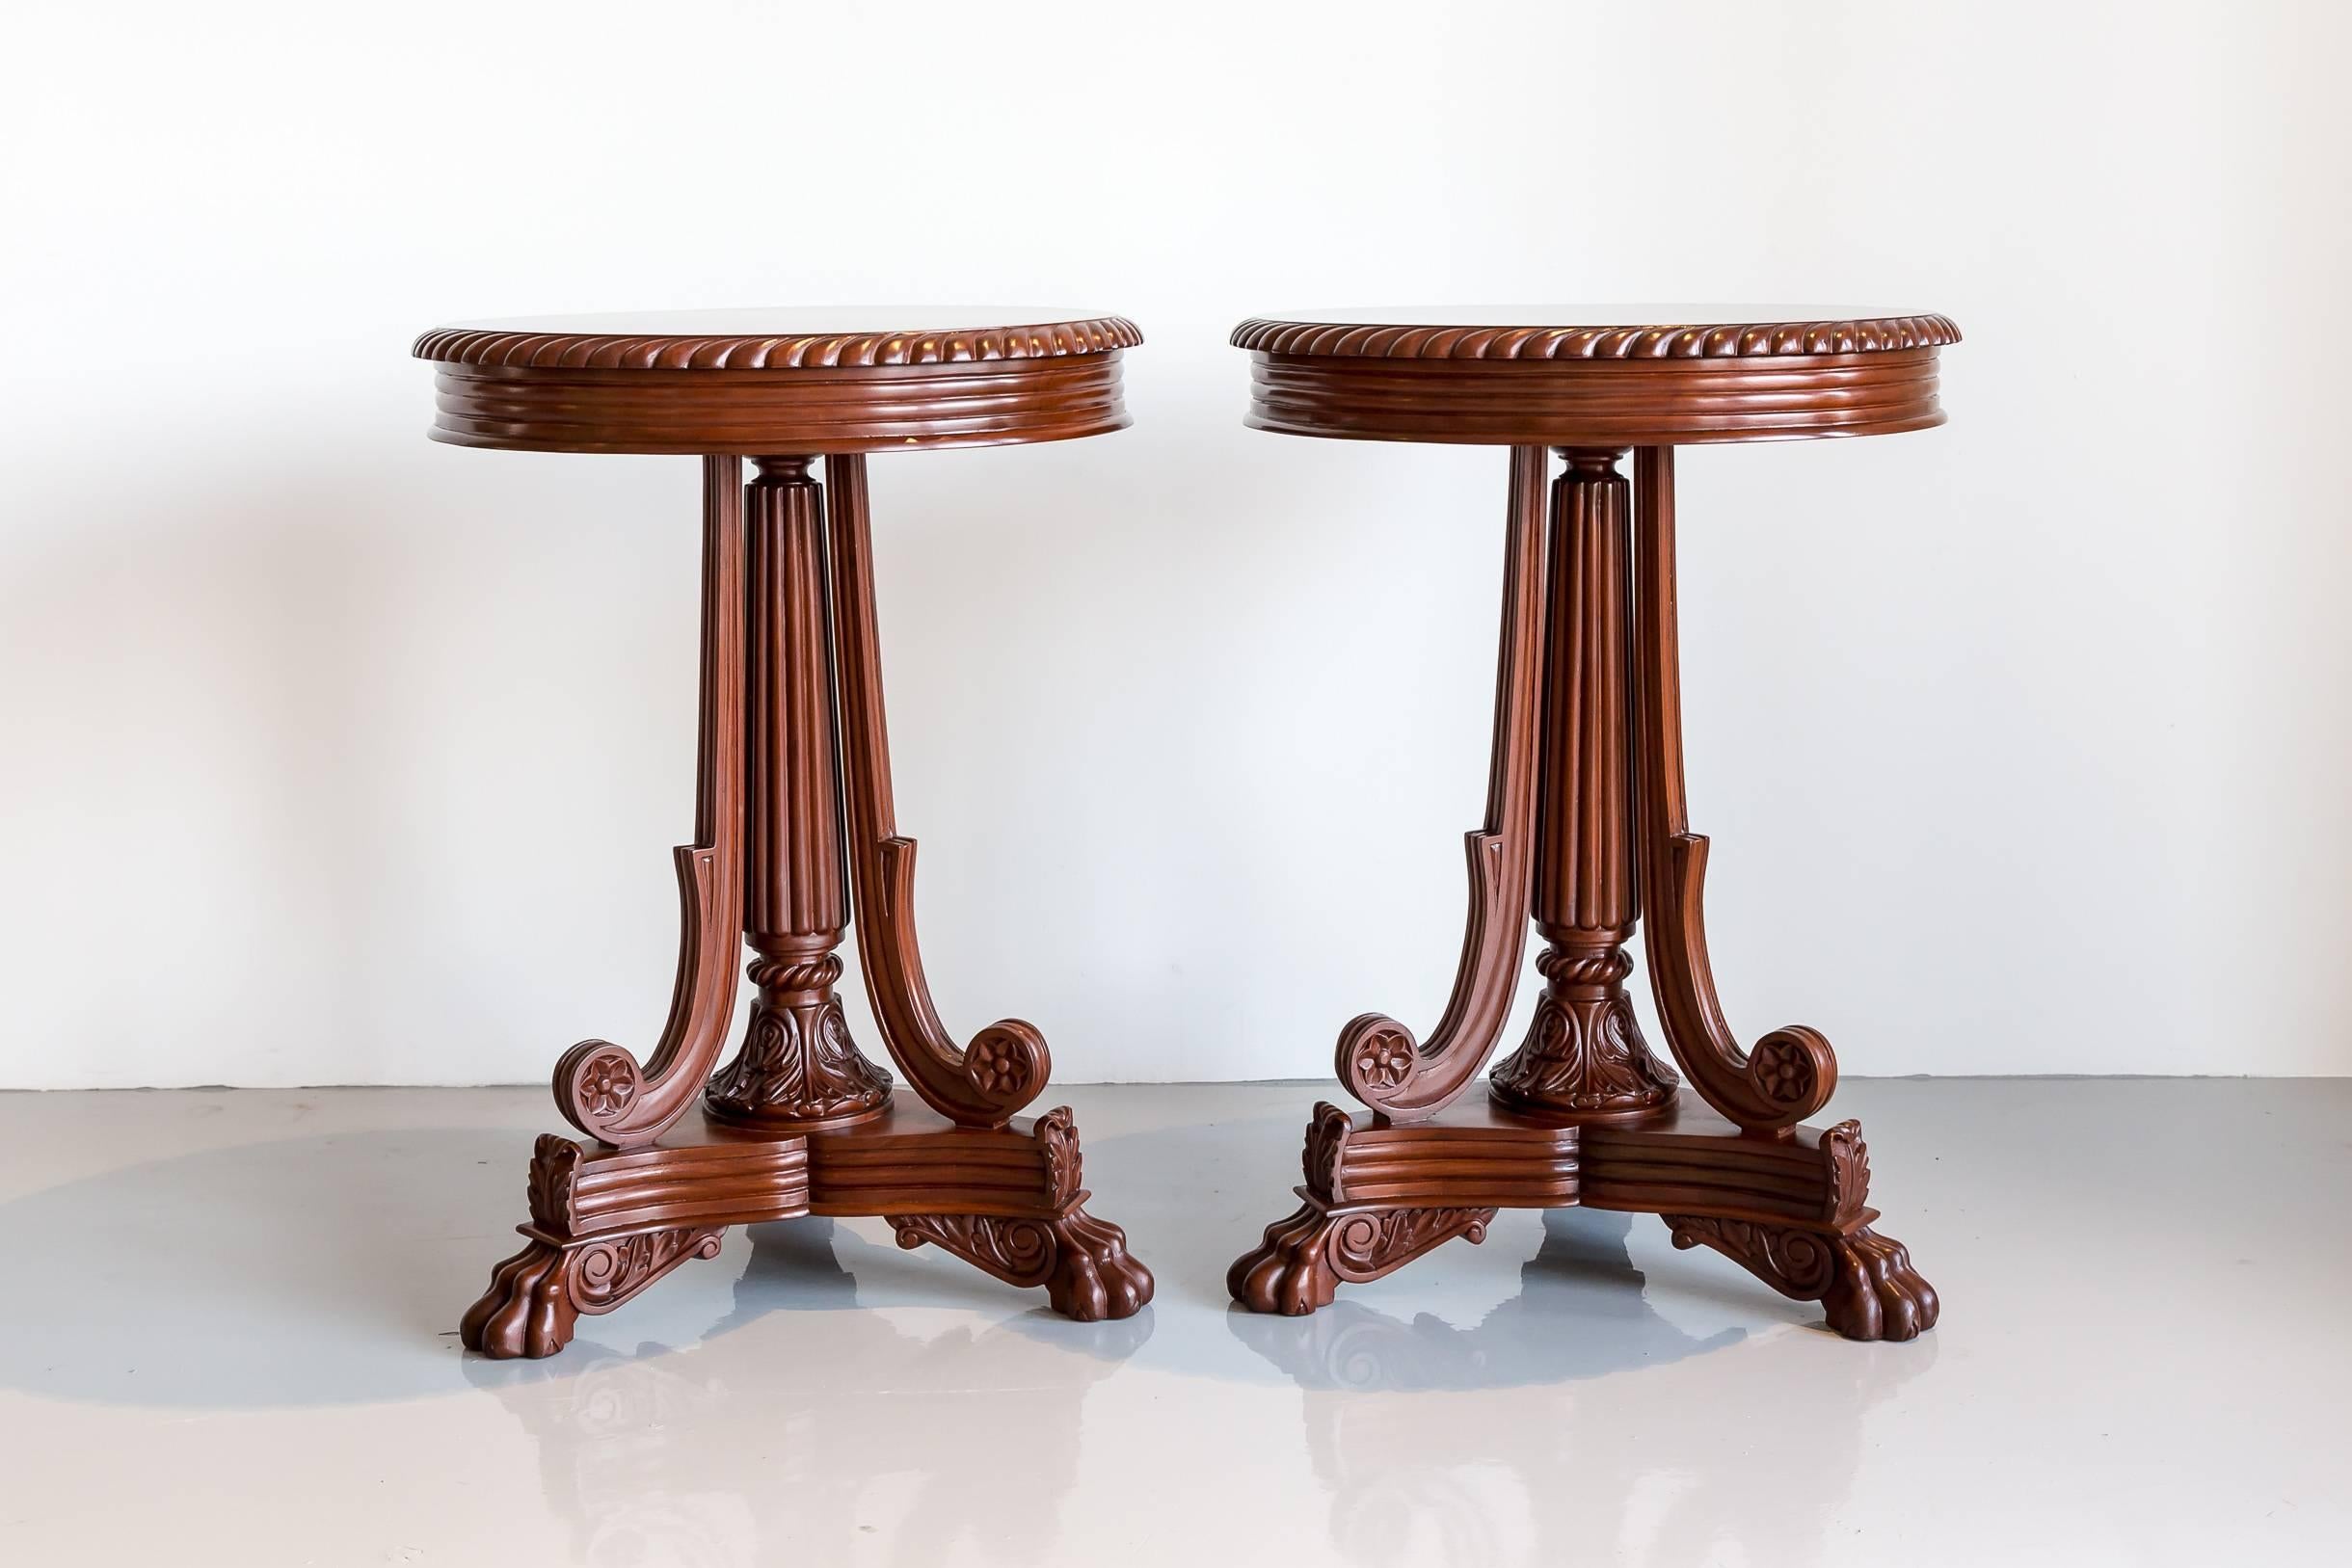 A pair of elegant British colonial round side tables made of mahogany. The round top with a gadrooned edge rests on a reeded column and three curving supports ending on a flat and craved tri-form base with paw feet.

The tables were found in